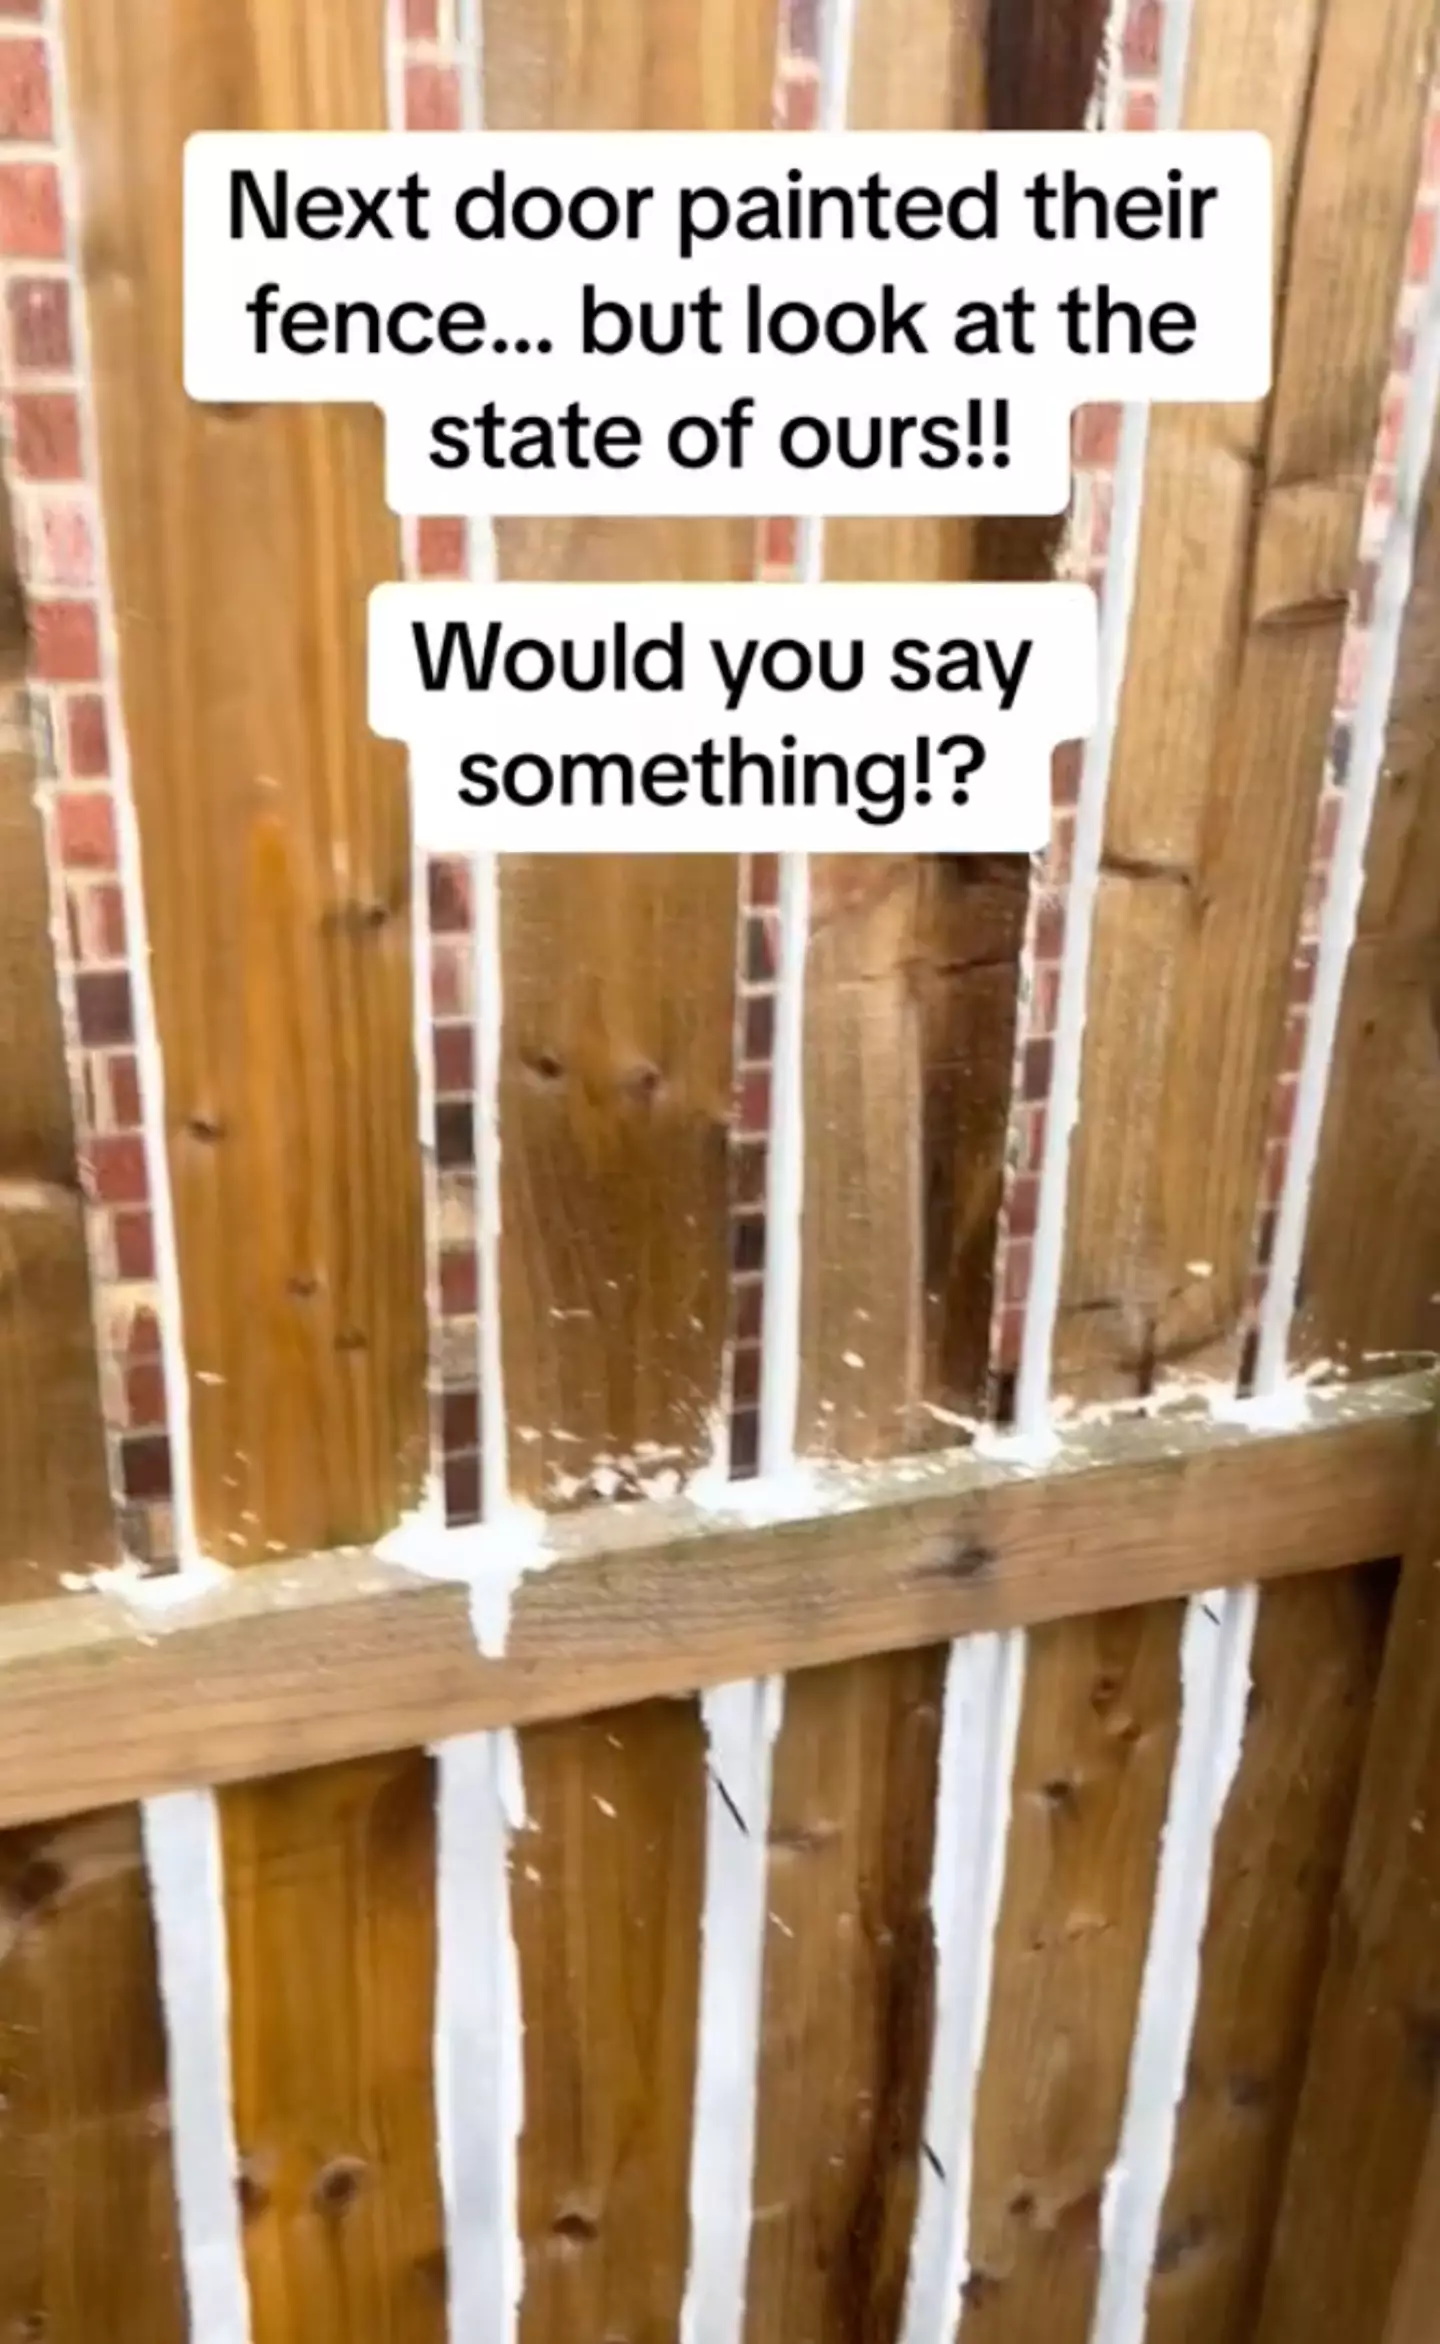 The mum showed off the results of her neighbour's badly painted fence.